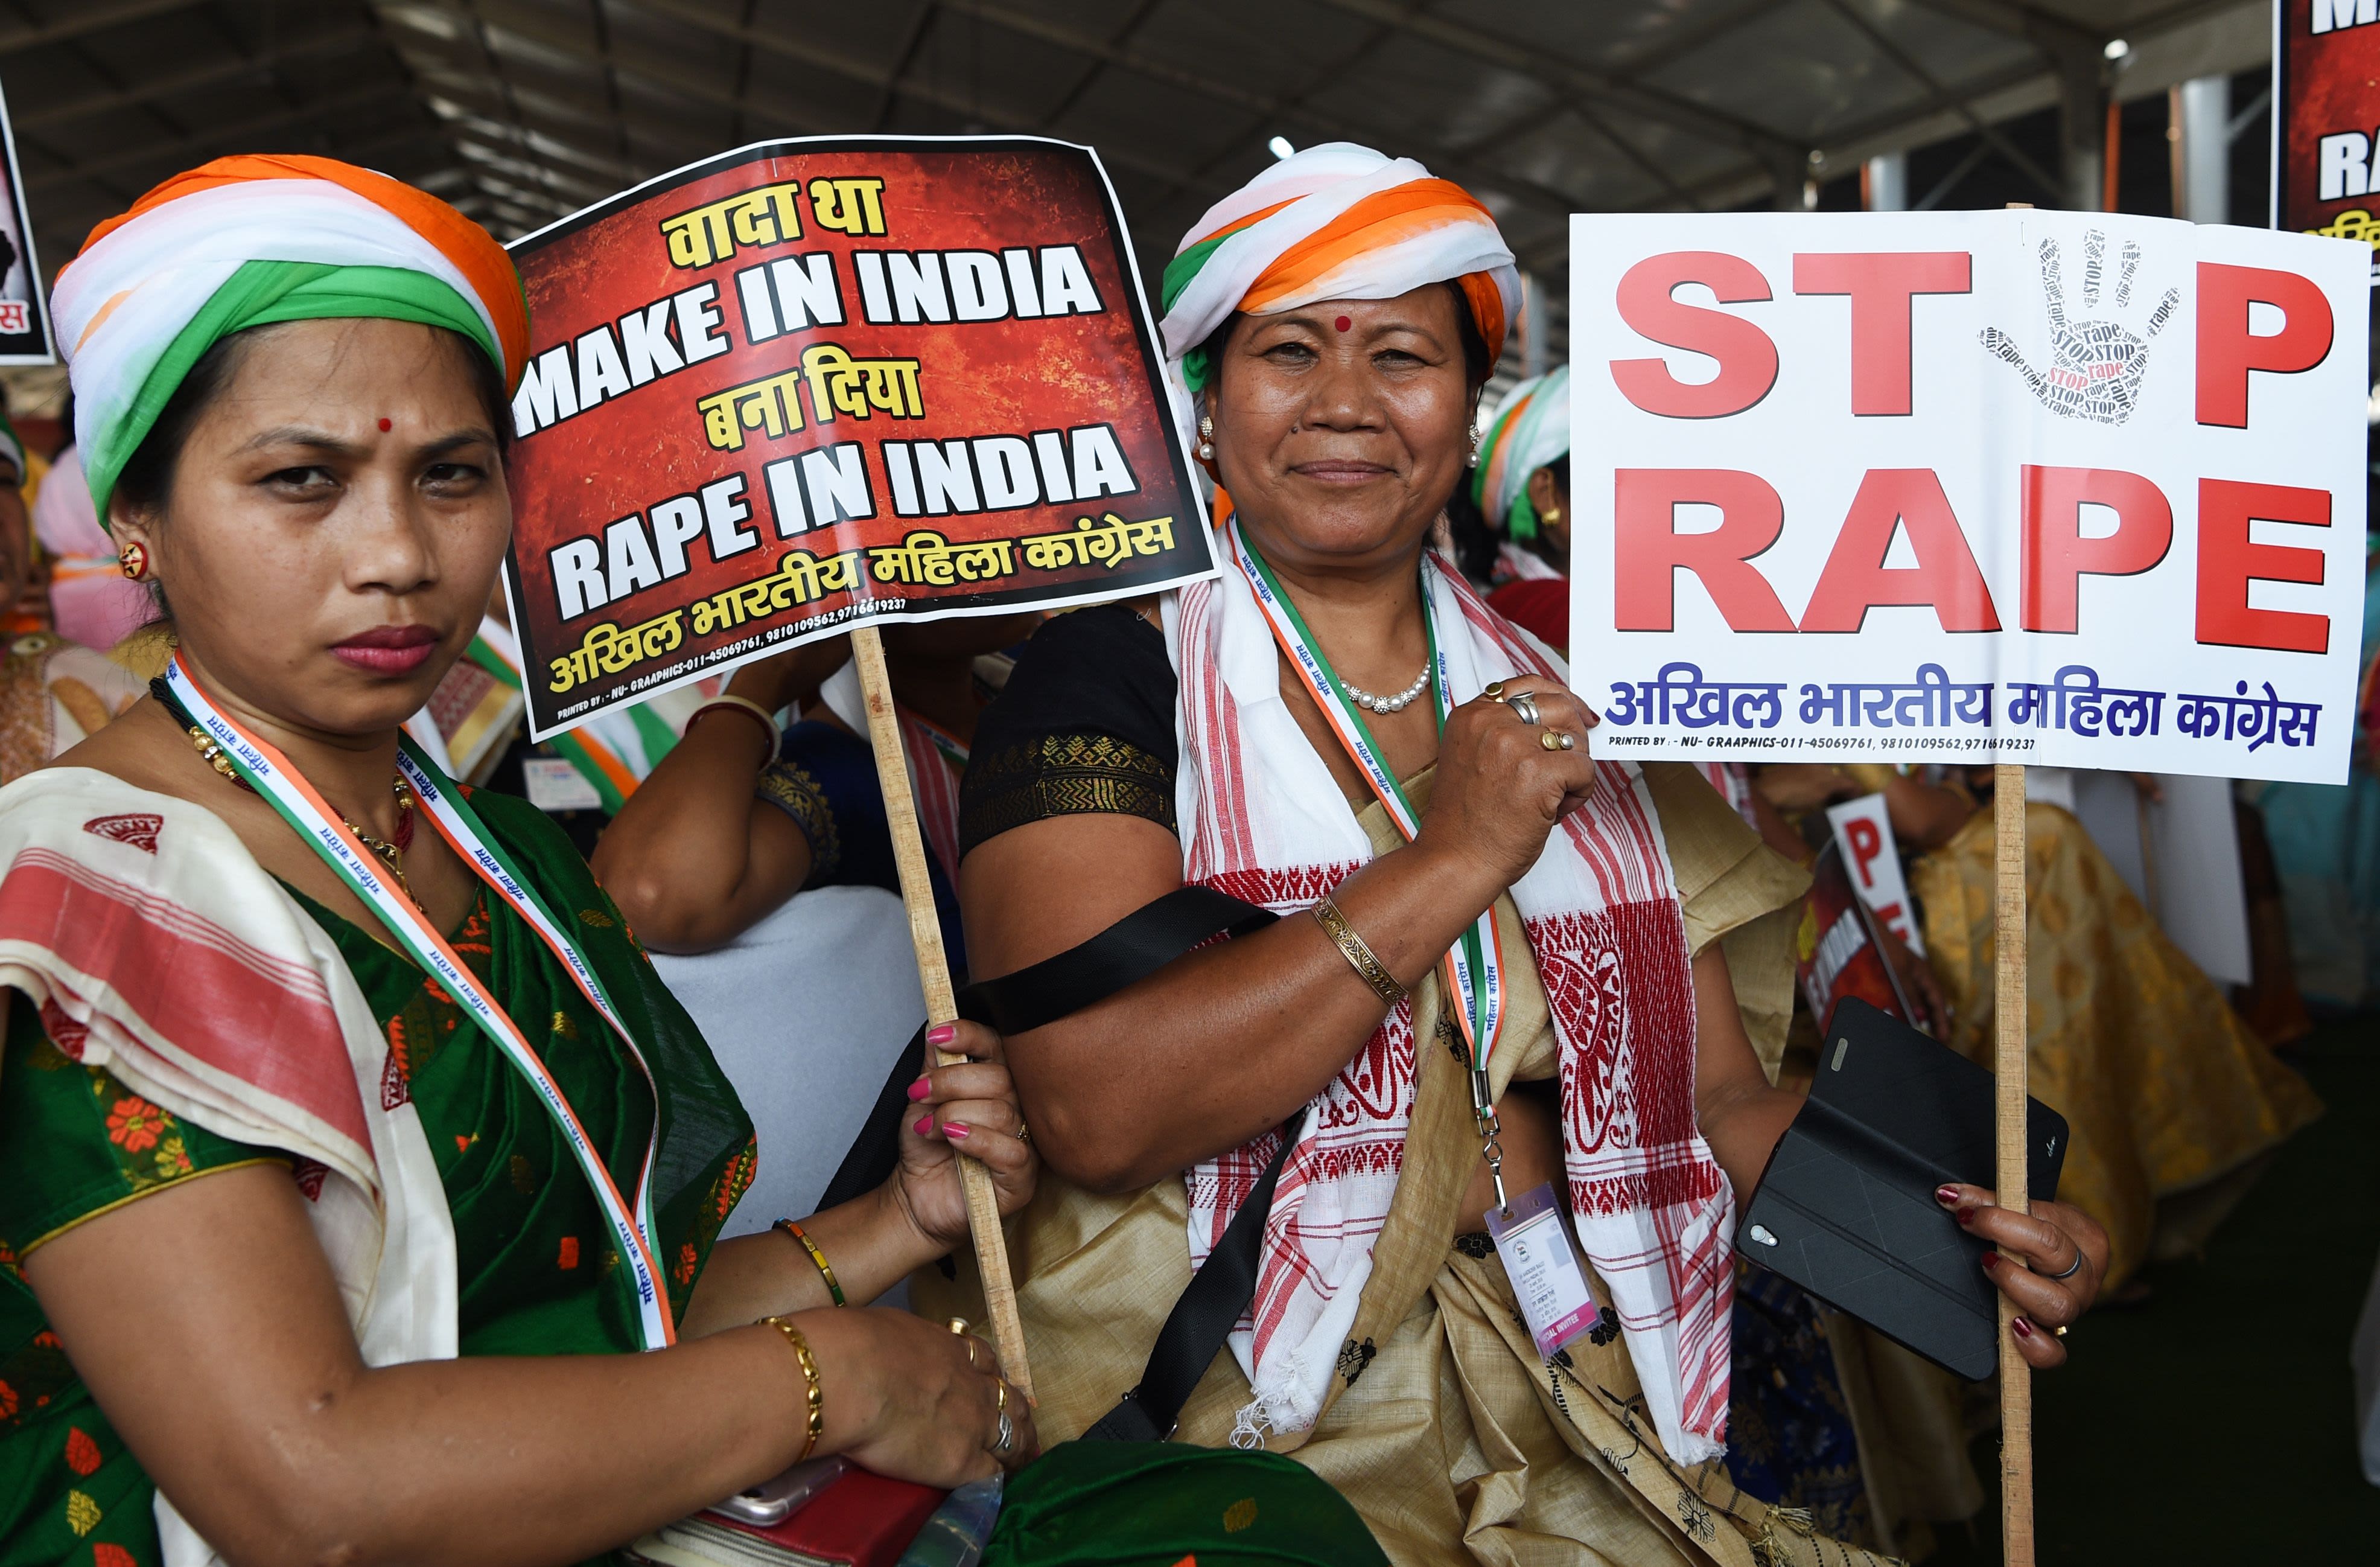 Rape X Hindi - India launches sex offenders registry, amid spate of rape cases | CNN